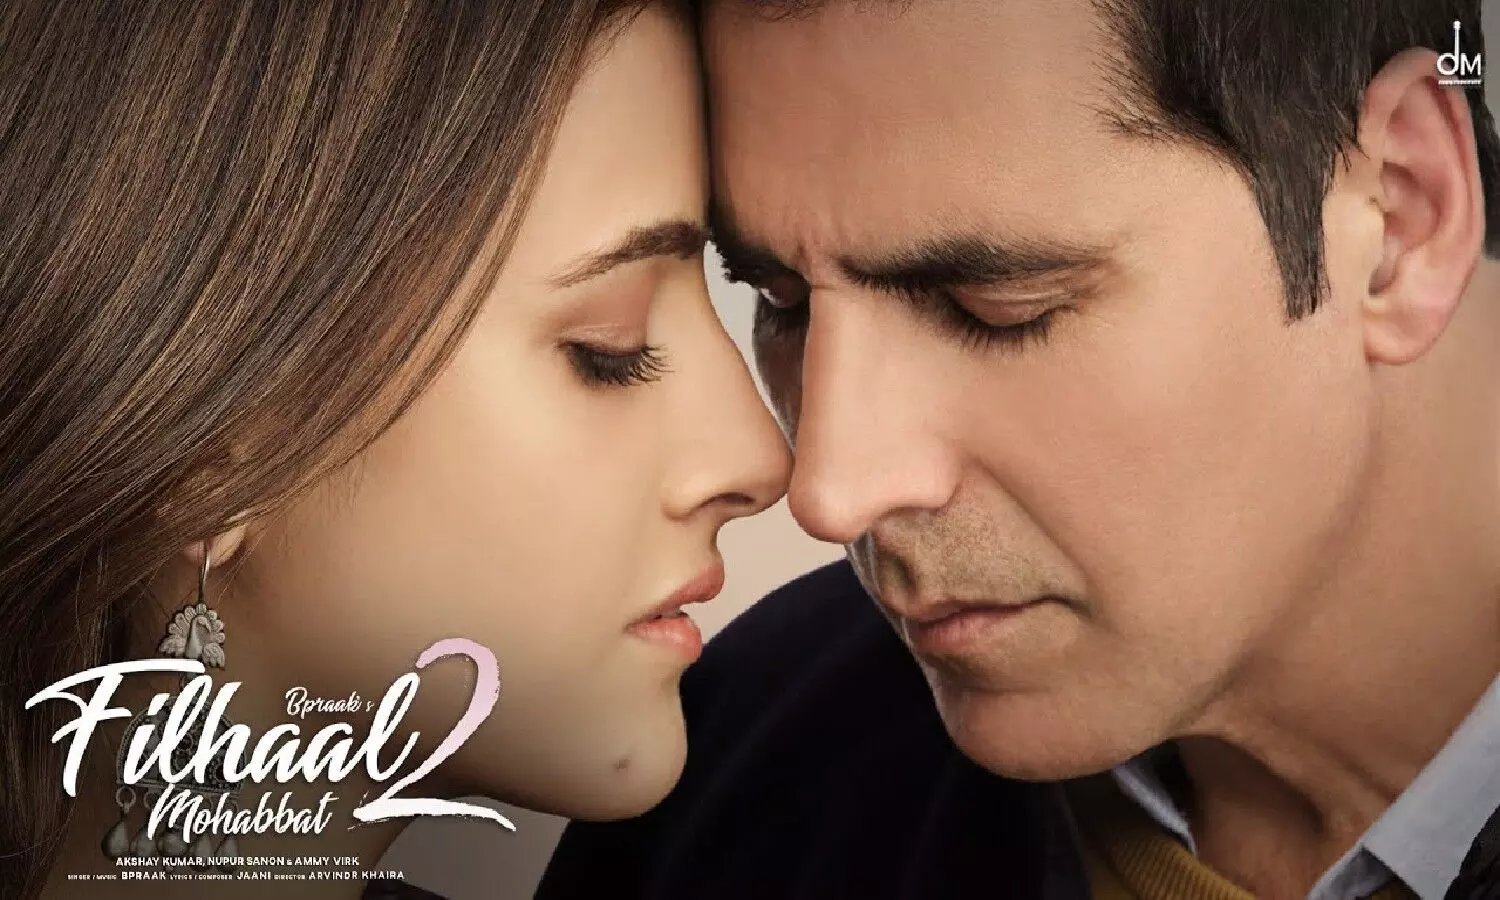 The name of this new song of Akshay-Nupur is currently 2 Mohabbat (Filhaal 2 Mohabbat).